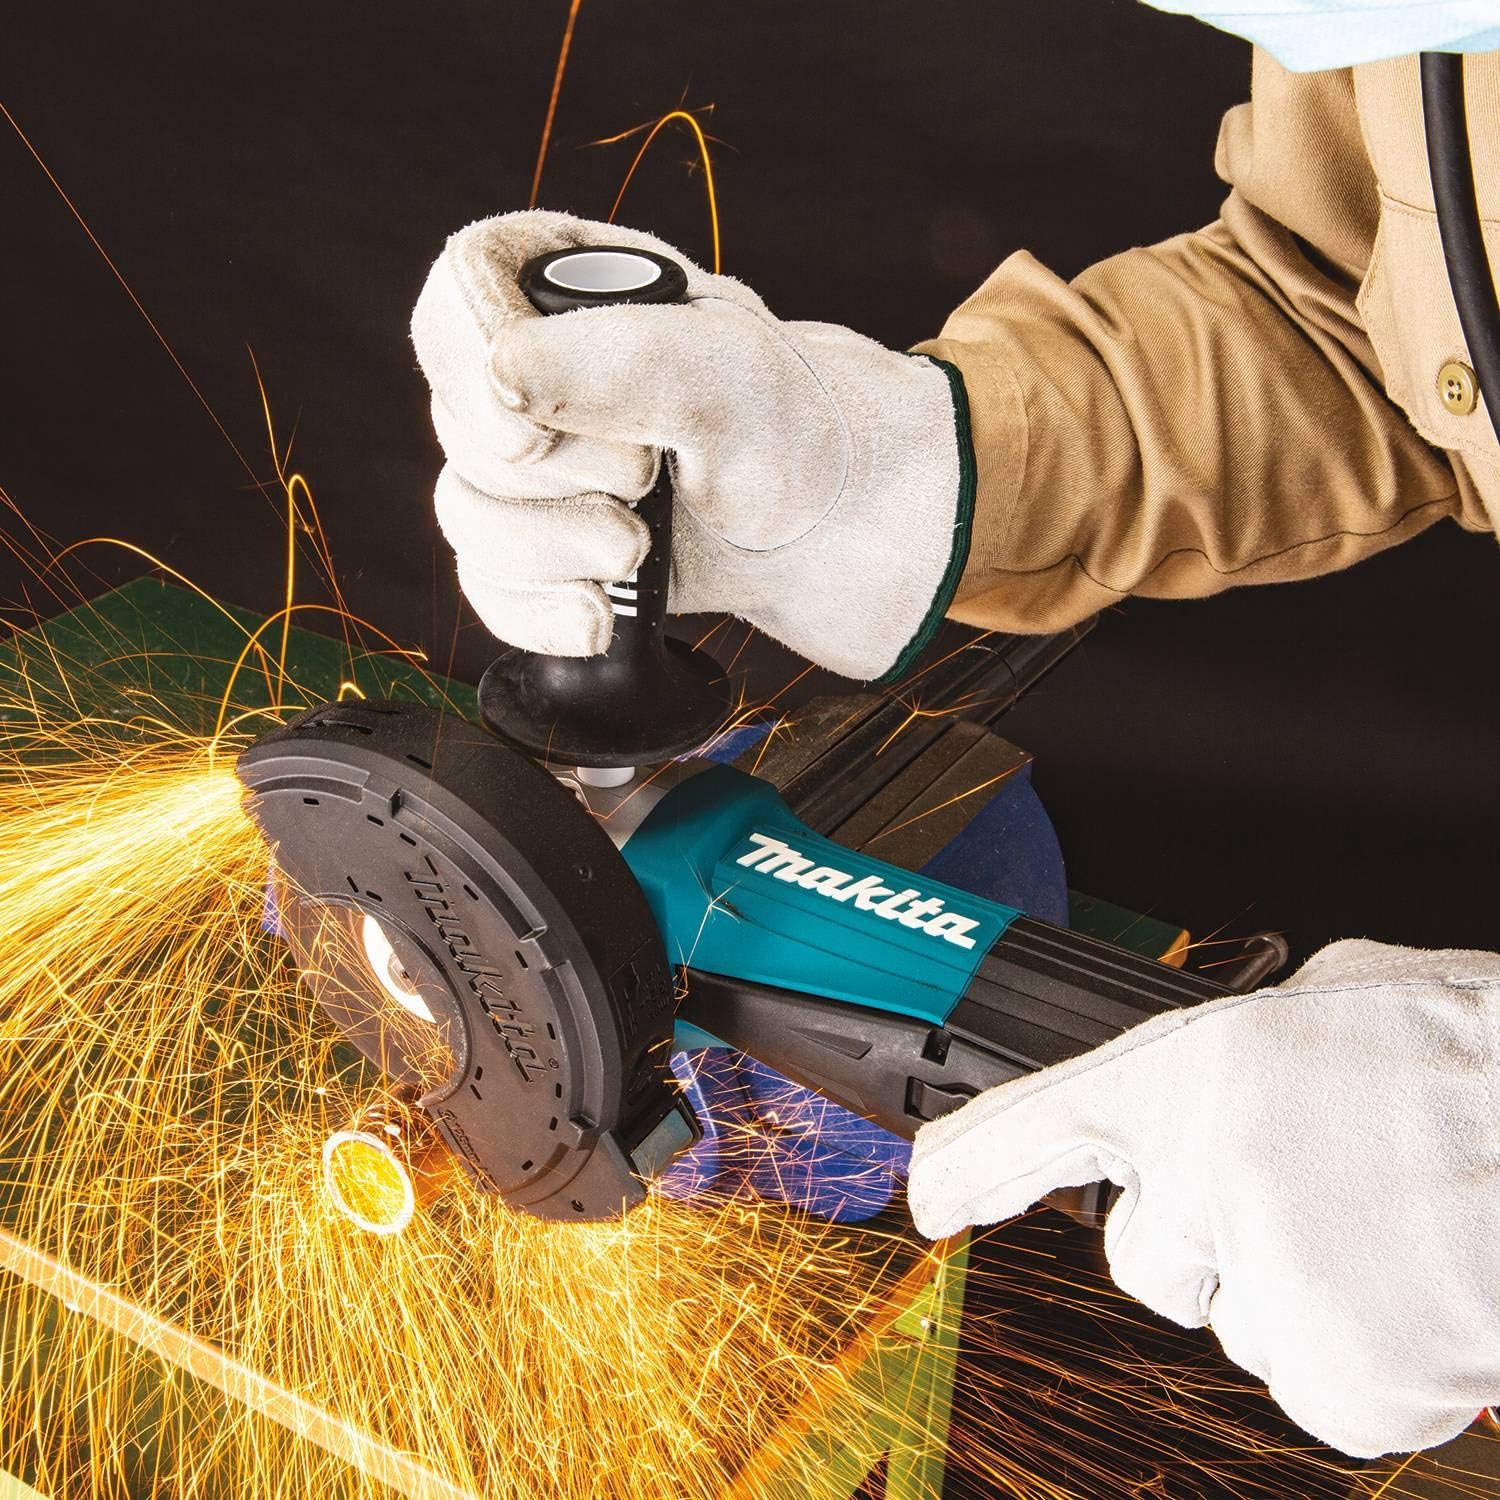 Makita GA4553R 4-1/2 Paddle Switch Angle Grinder, with Non-Removable Guard